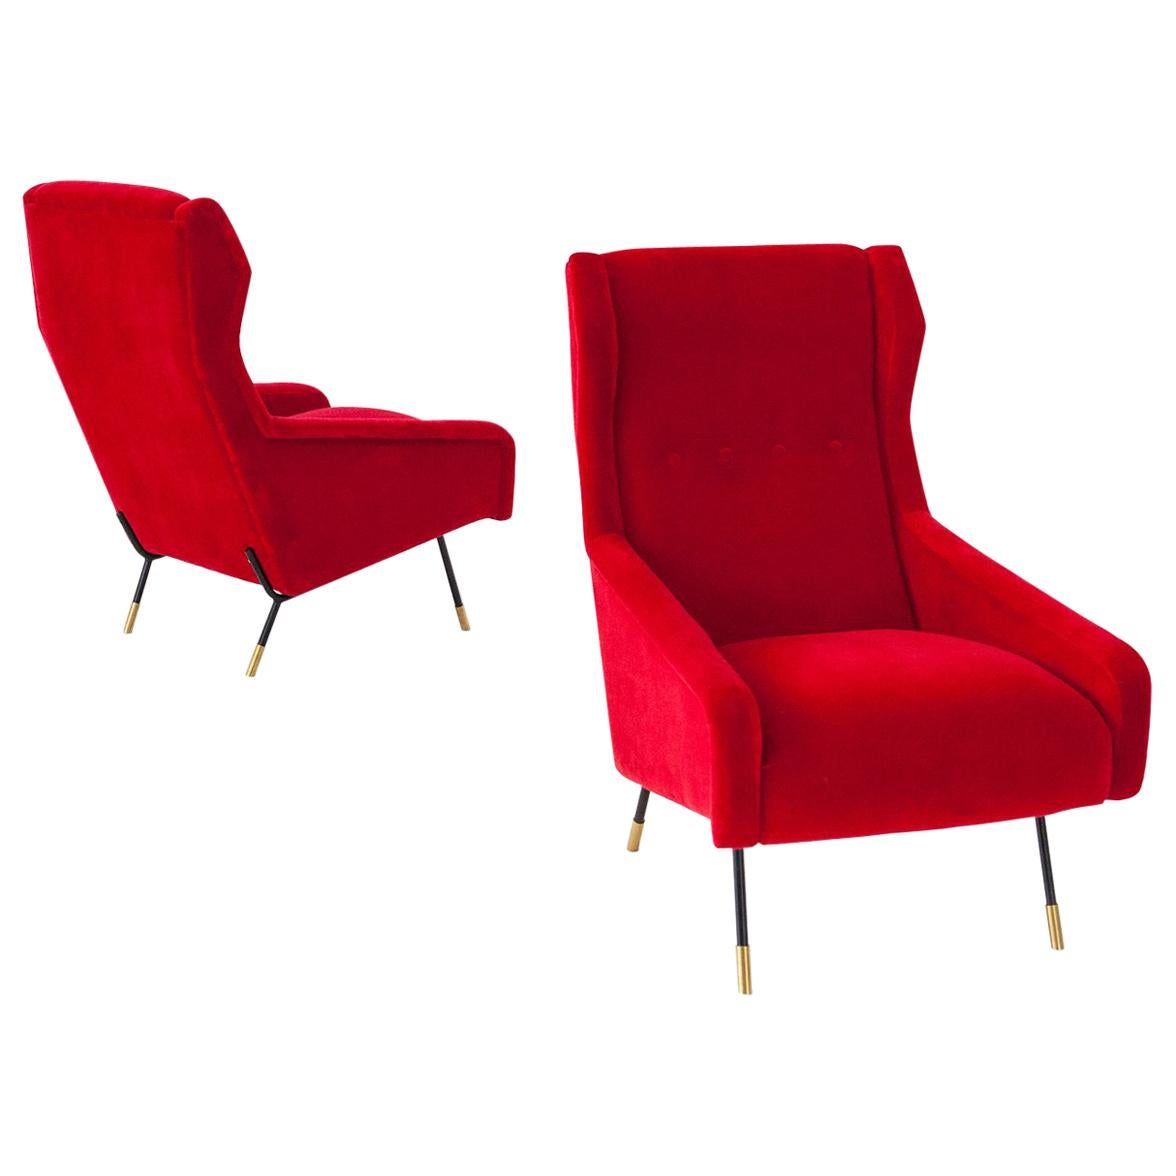 Pair of Italian Red Velvet Brass and Iron Lounge Chairs, 1950s